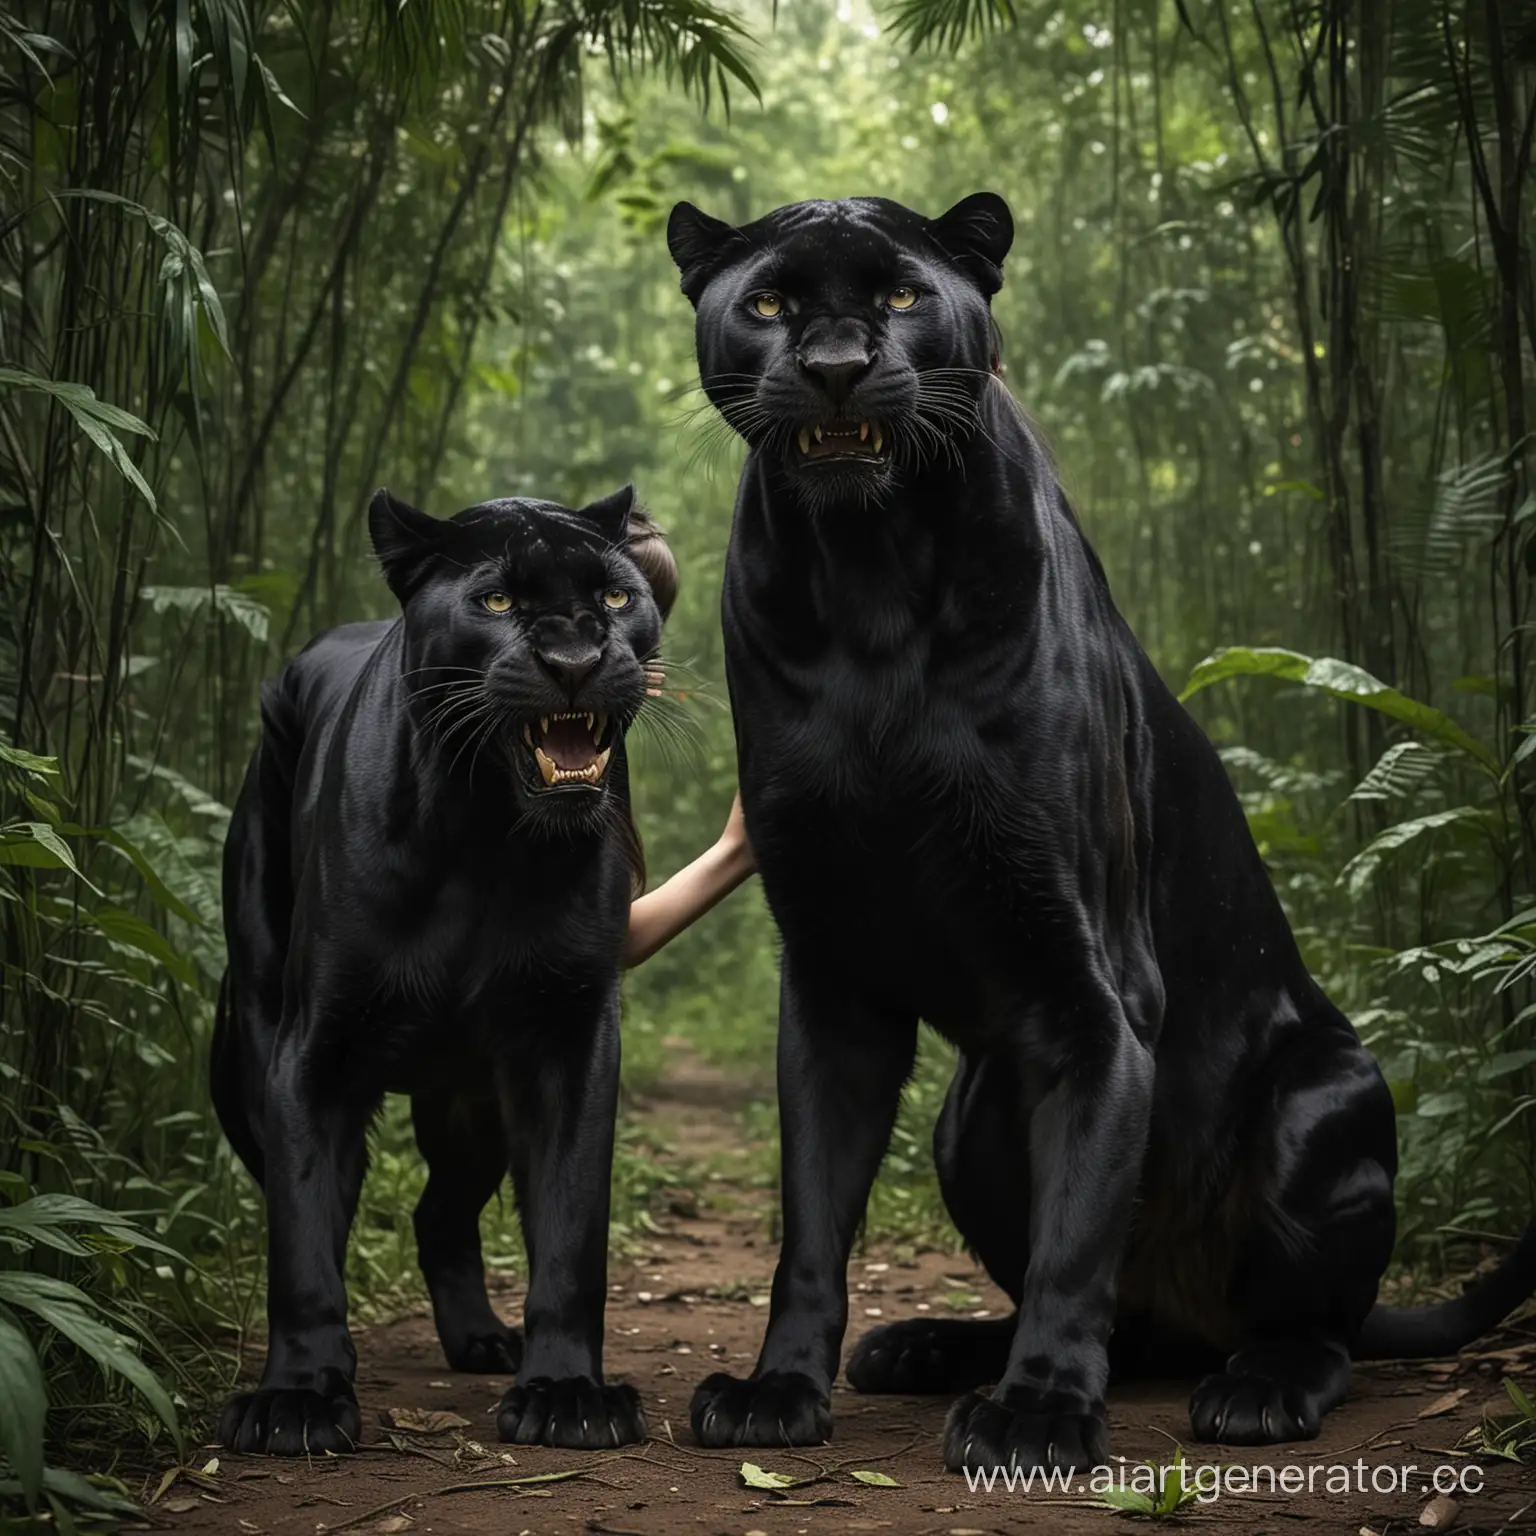 Russian-Girl-Embracing-Ferocious-Black-Panther-in-Jungle-Setting